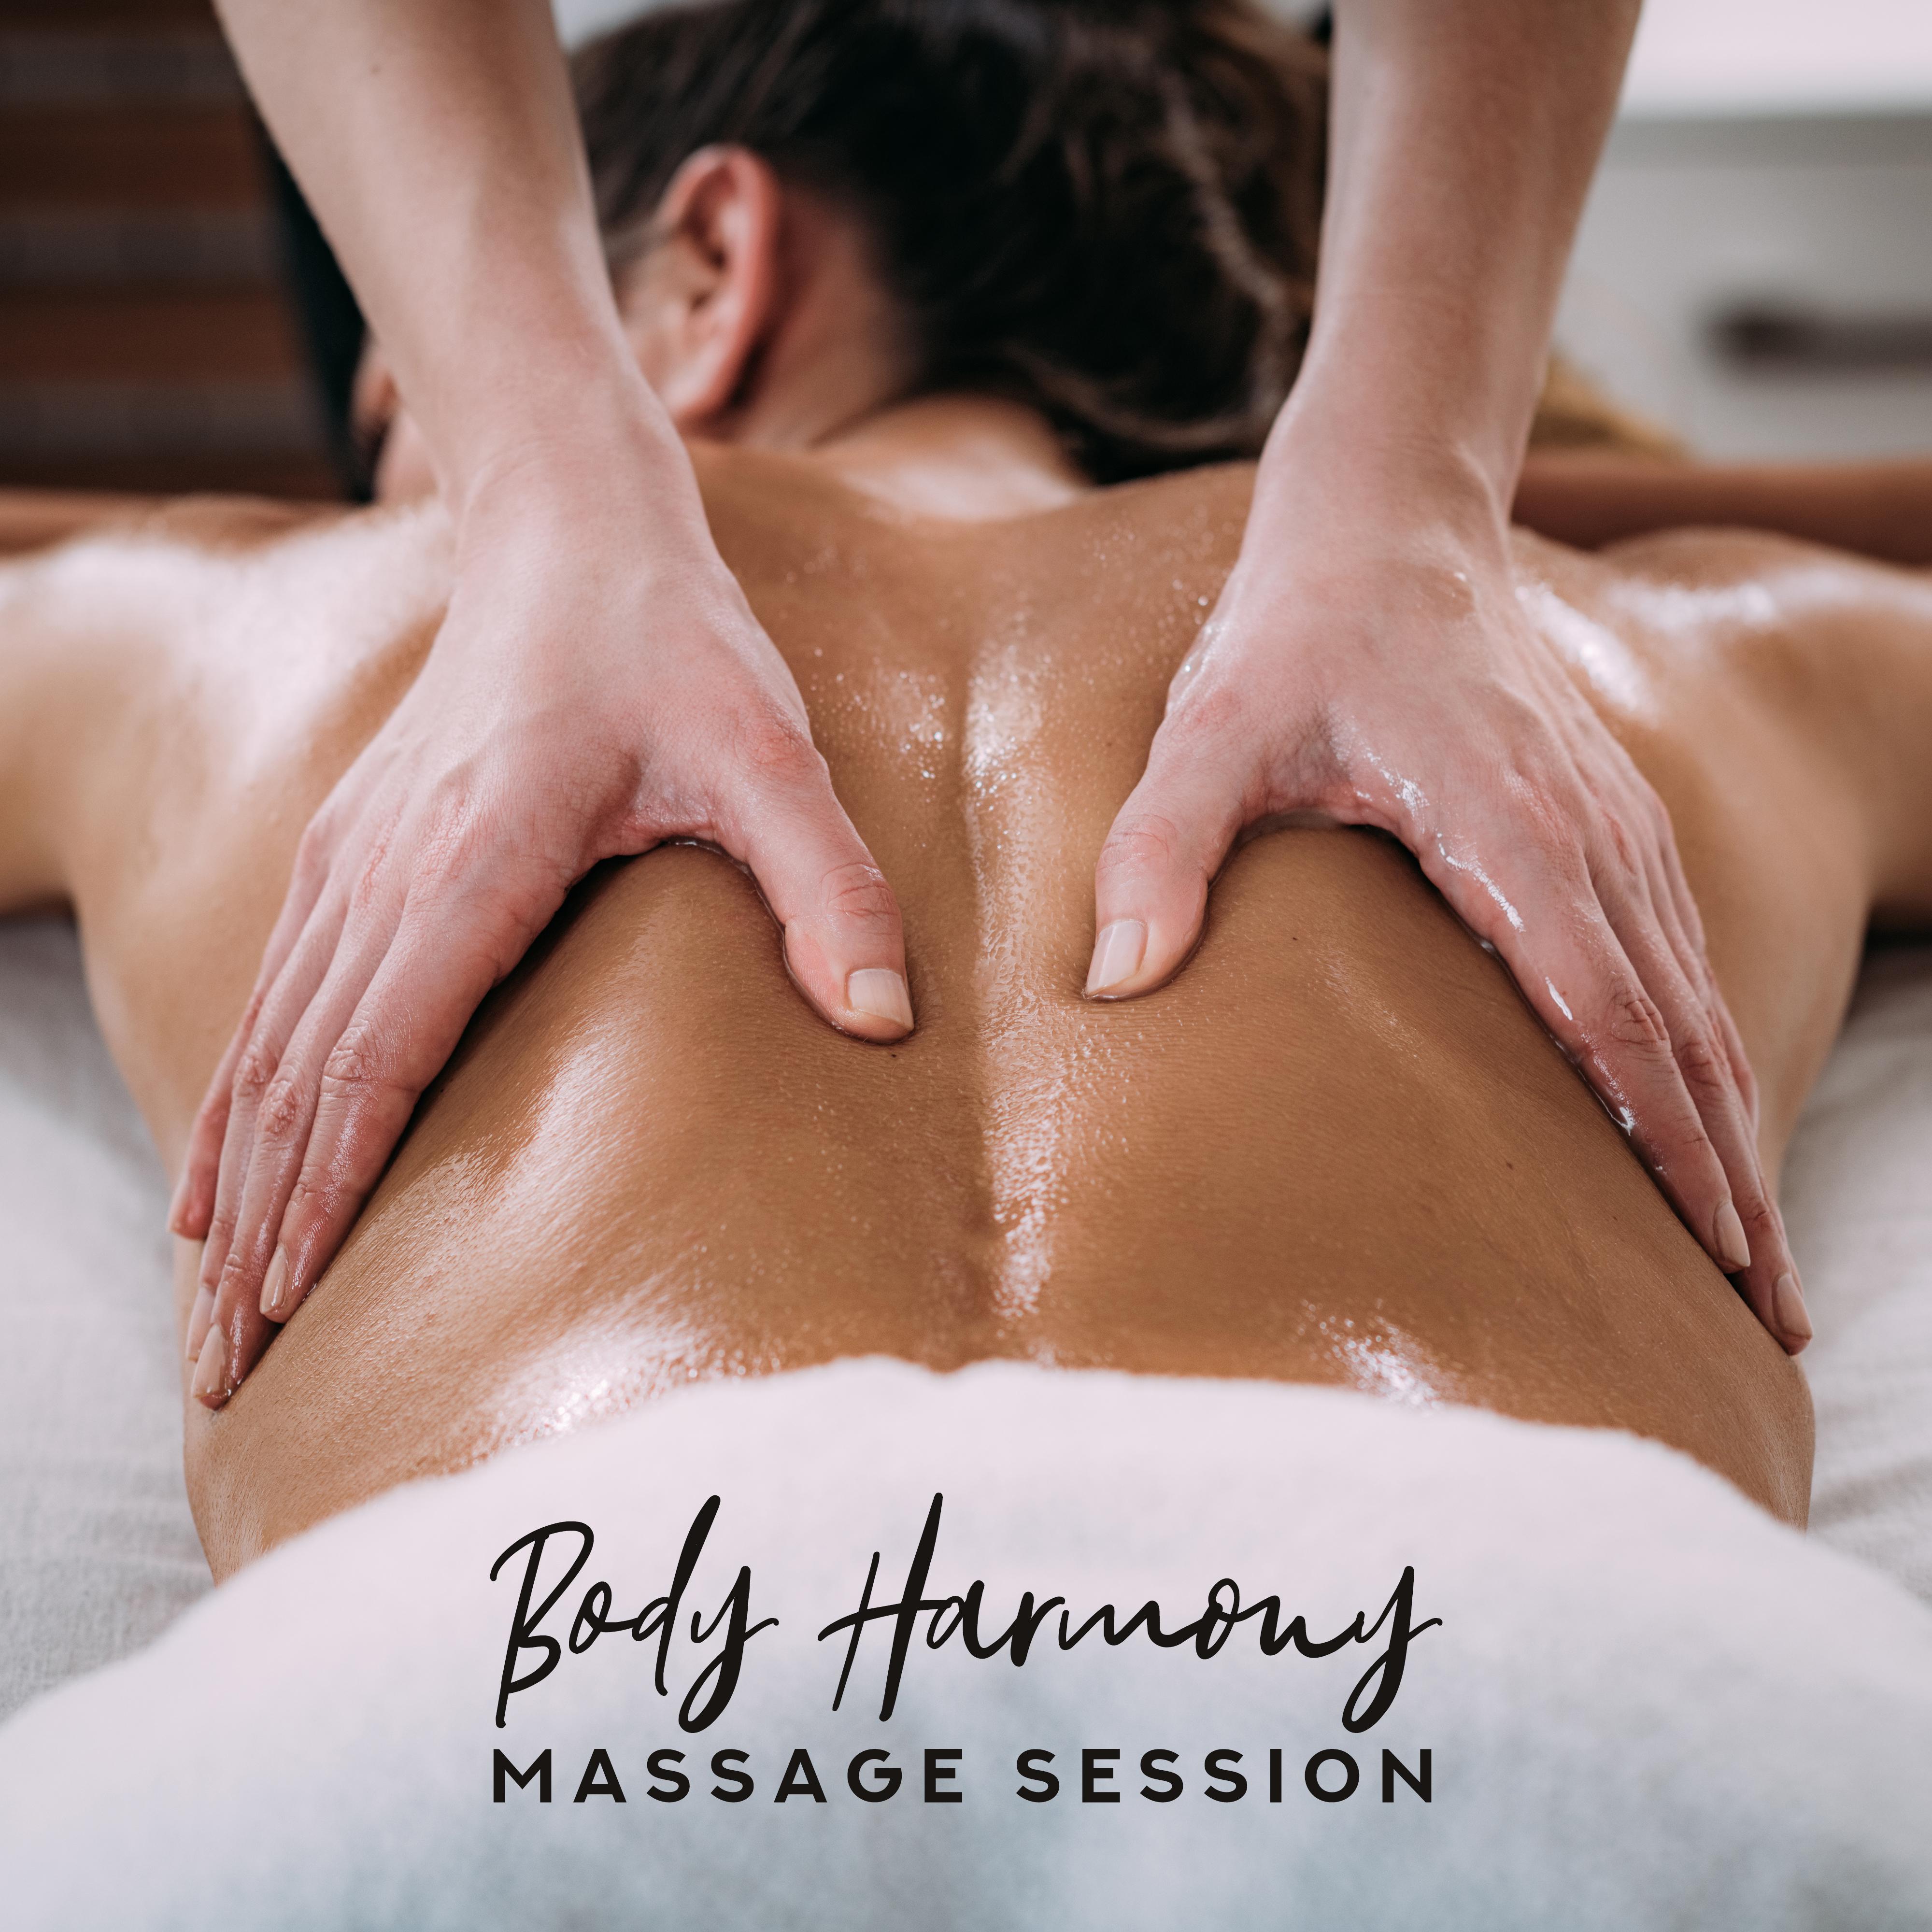 Body Harmony Massage Session: 2019 New Age Nature & Ambient Sounds for Total Relaxation at Spa, Wellness, Hot Bath, Sauna